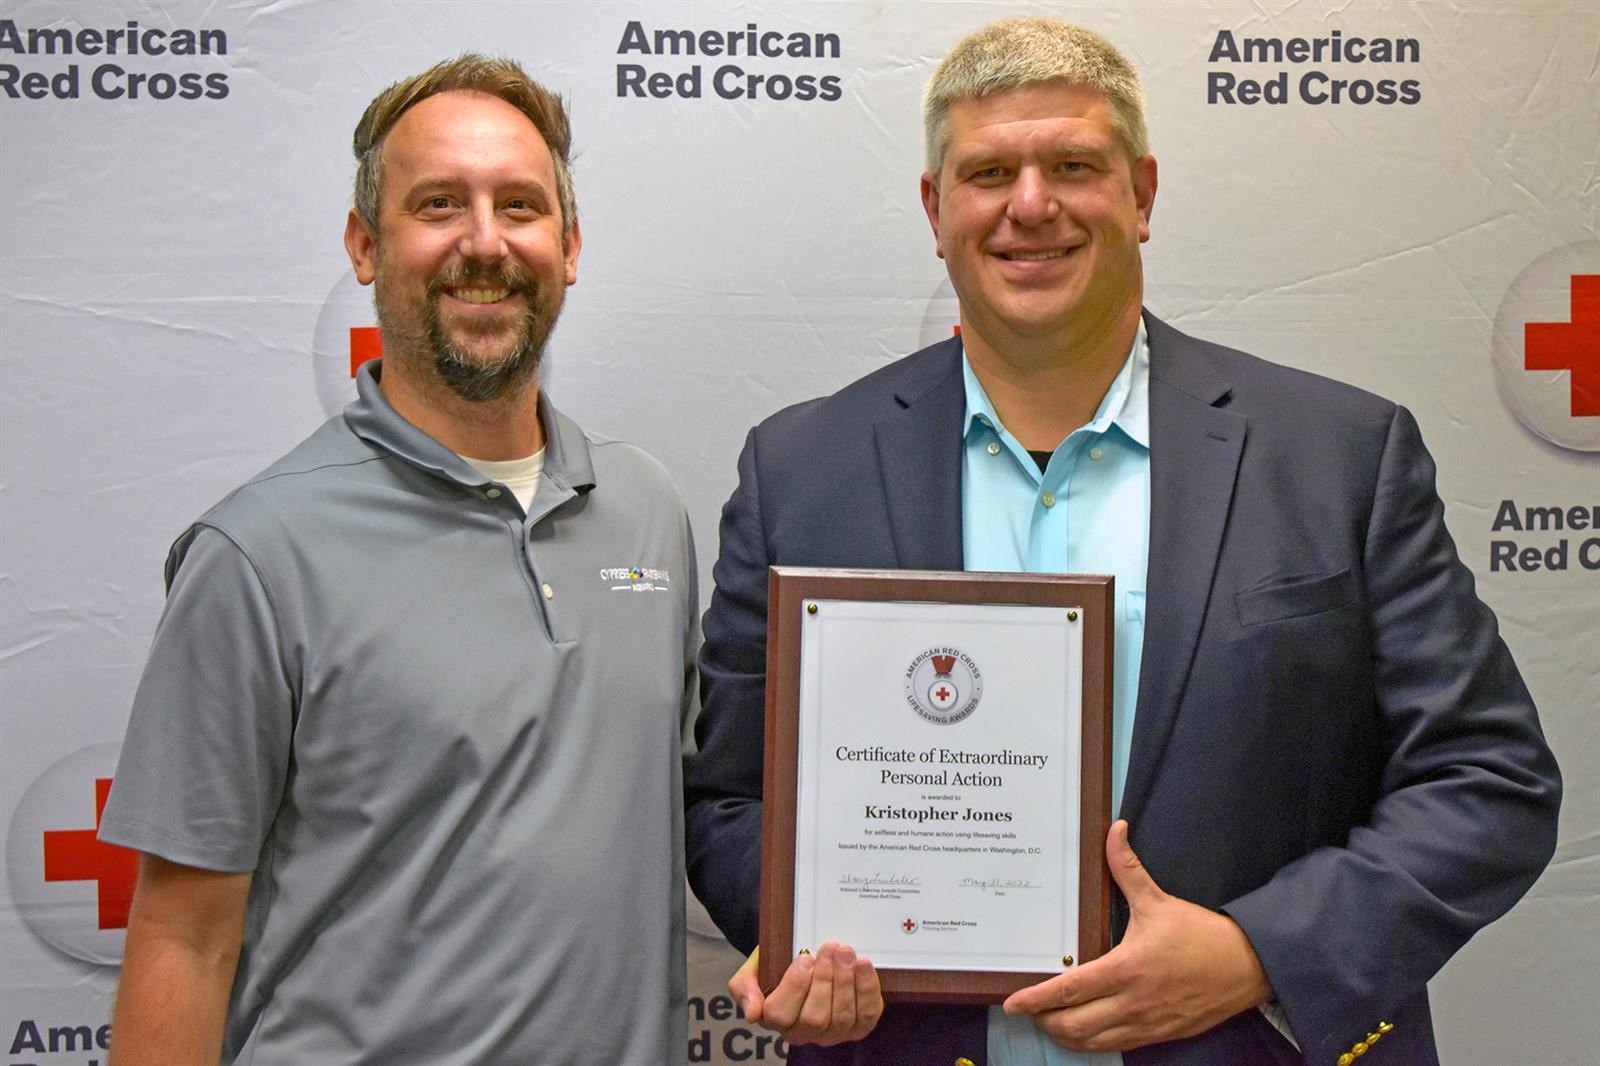 CFISD Assistant Director of Aquatics Kris Jones, right, was honored by the American Red Cross.